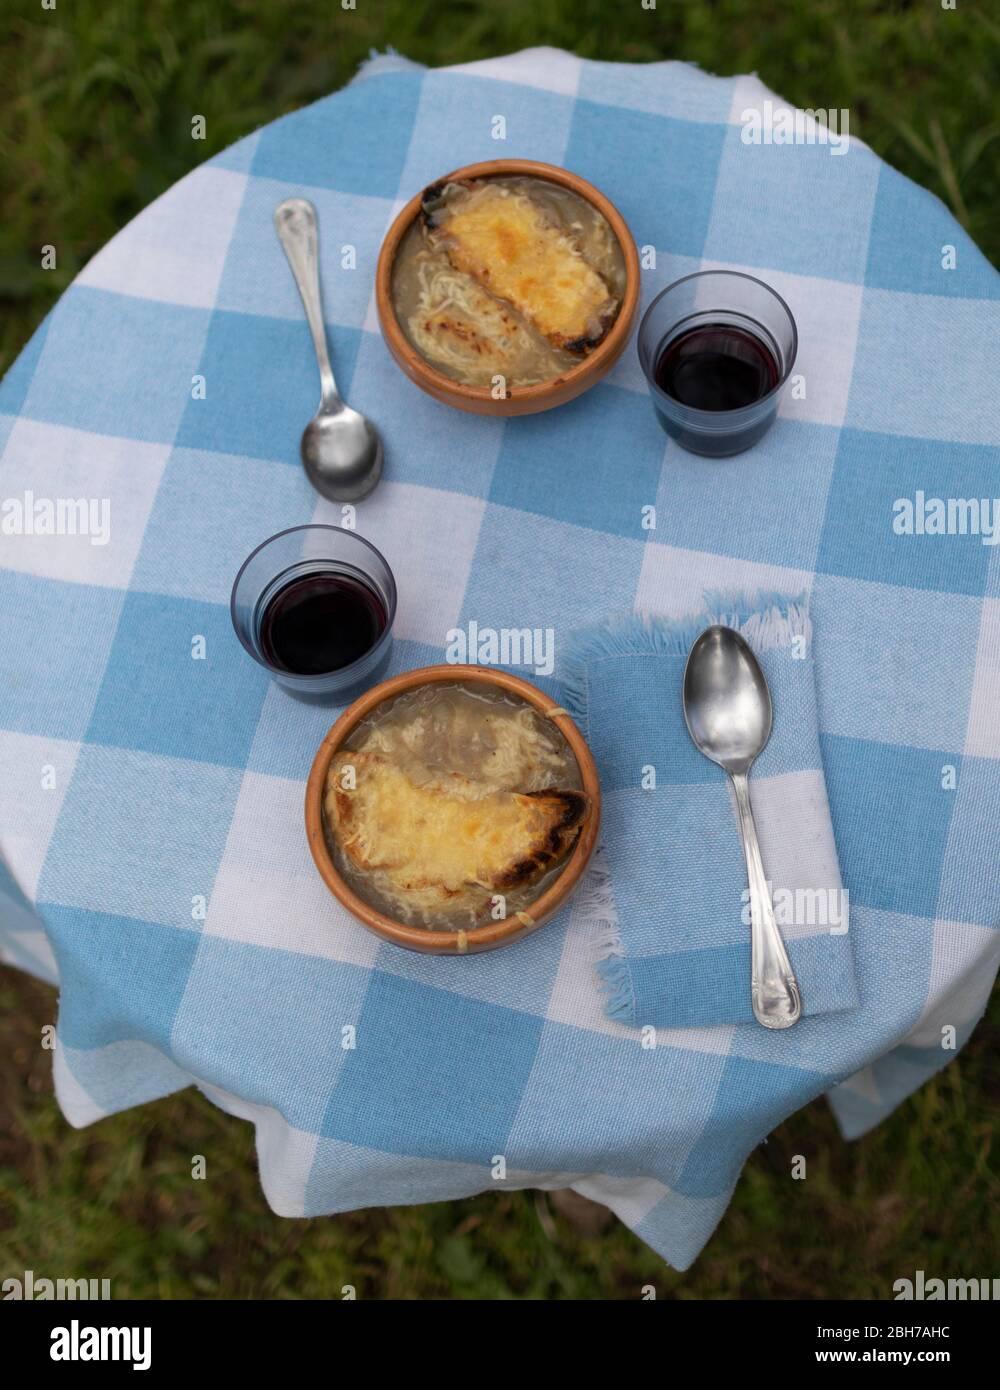 Traditional gratin onion soup dishes. Top view of a rustic table with blue squared tablecloth and ceramic plates with glasses of wine. Stock Photo